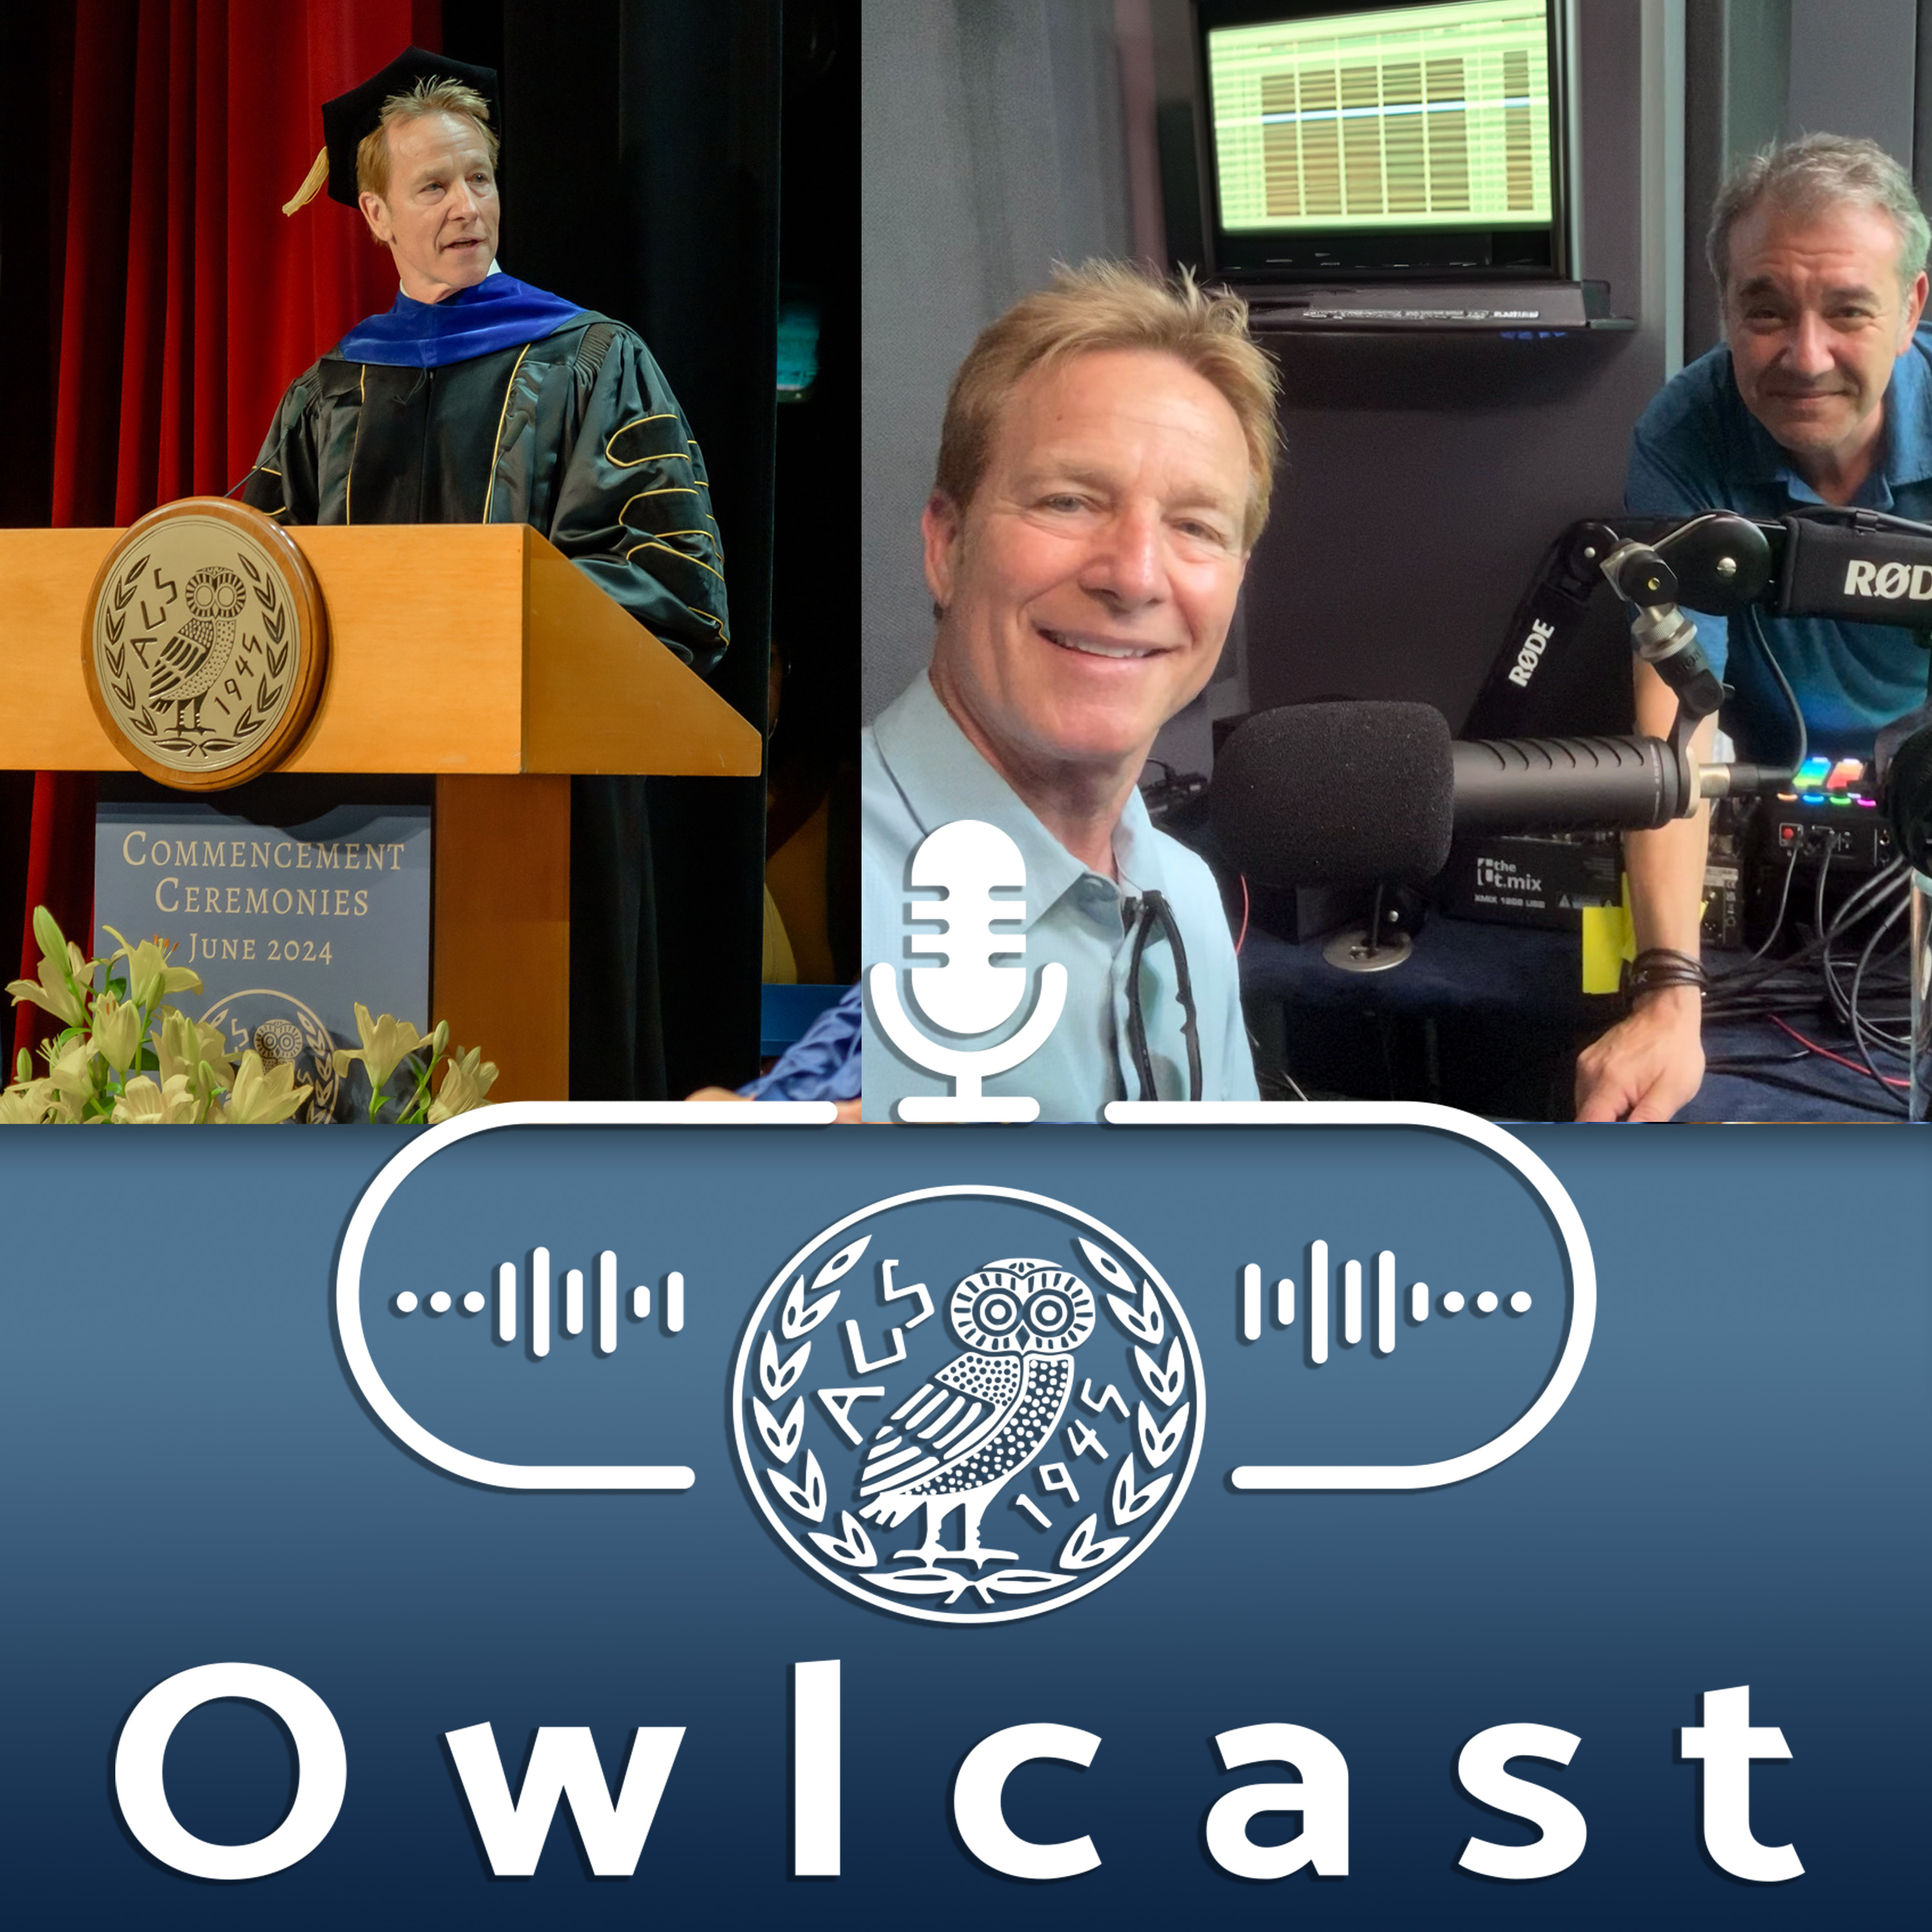 Owlcast 97 - Alumni Edition w/Tom Mustin • An Award-winning storyteller addresses the Class of 2024: Don't be afraid to fail but check your excuses at the door!